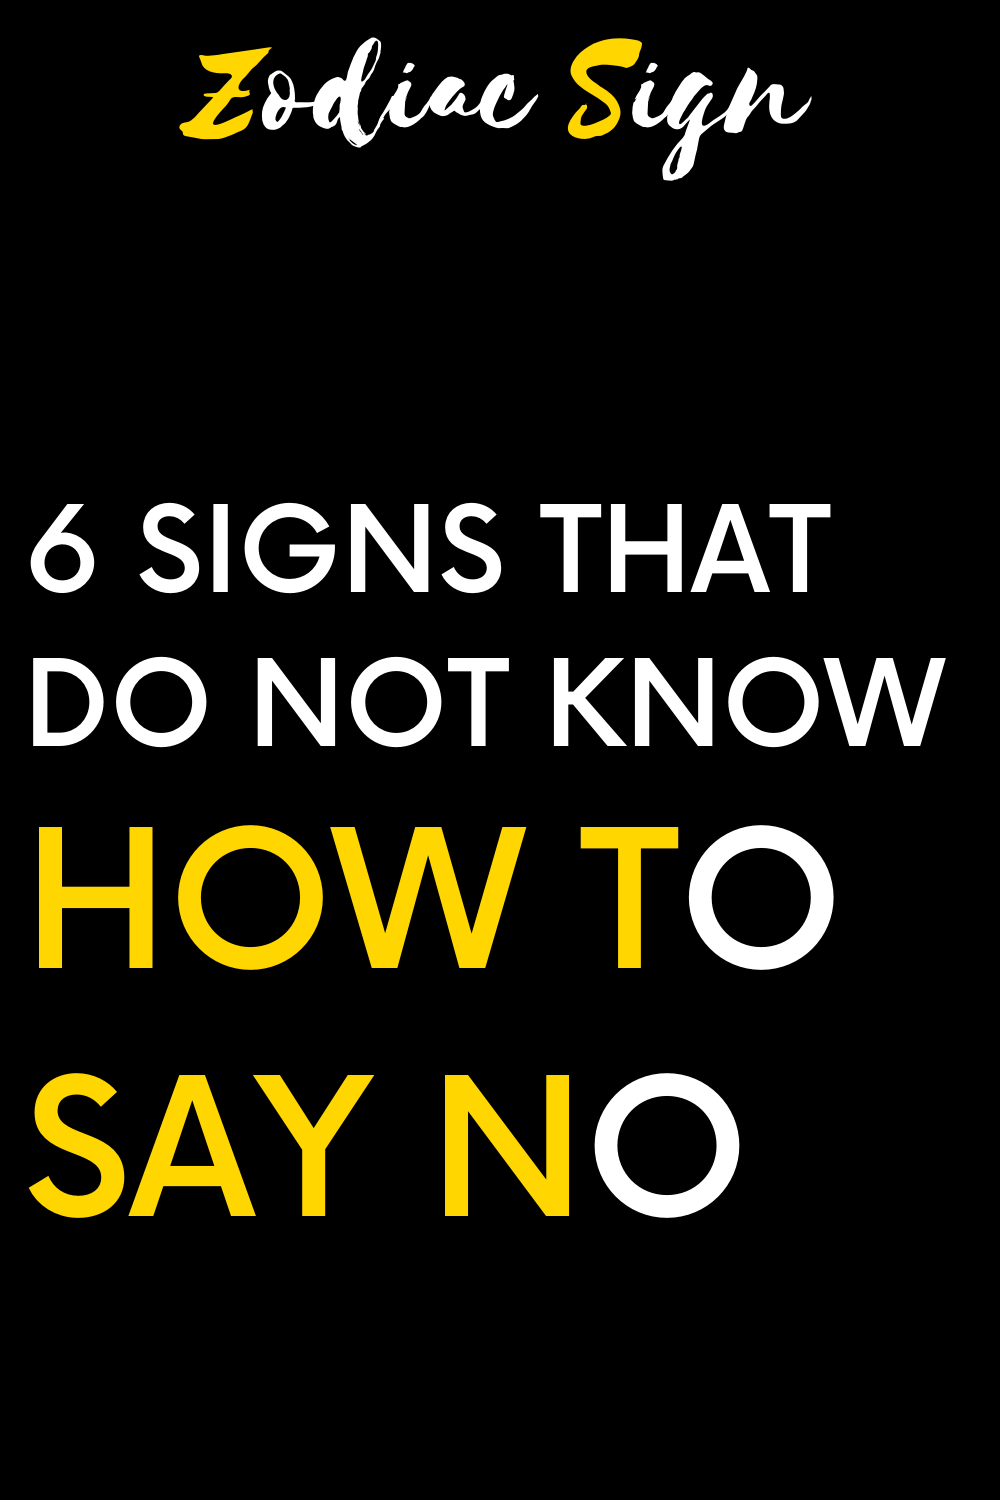 6 signs that do not know how to say NO